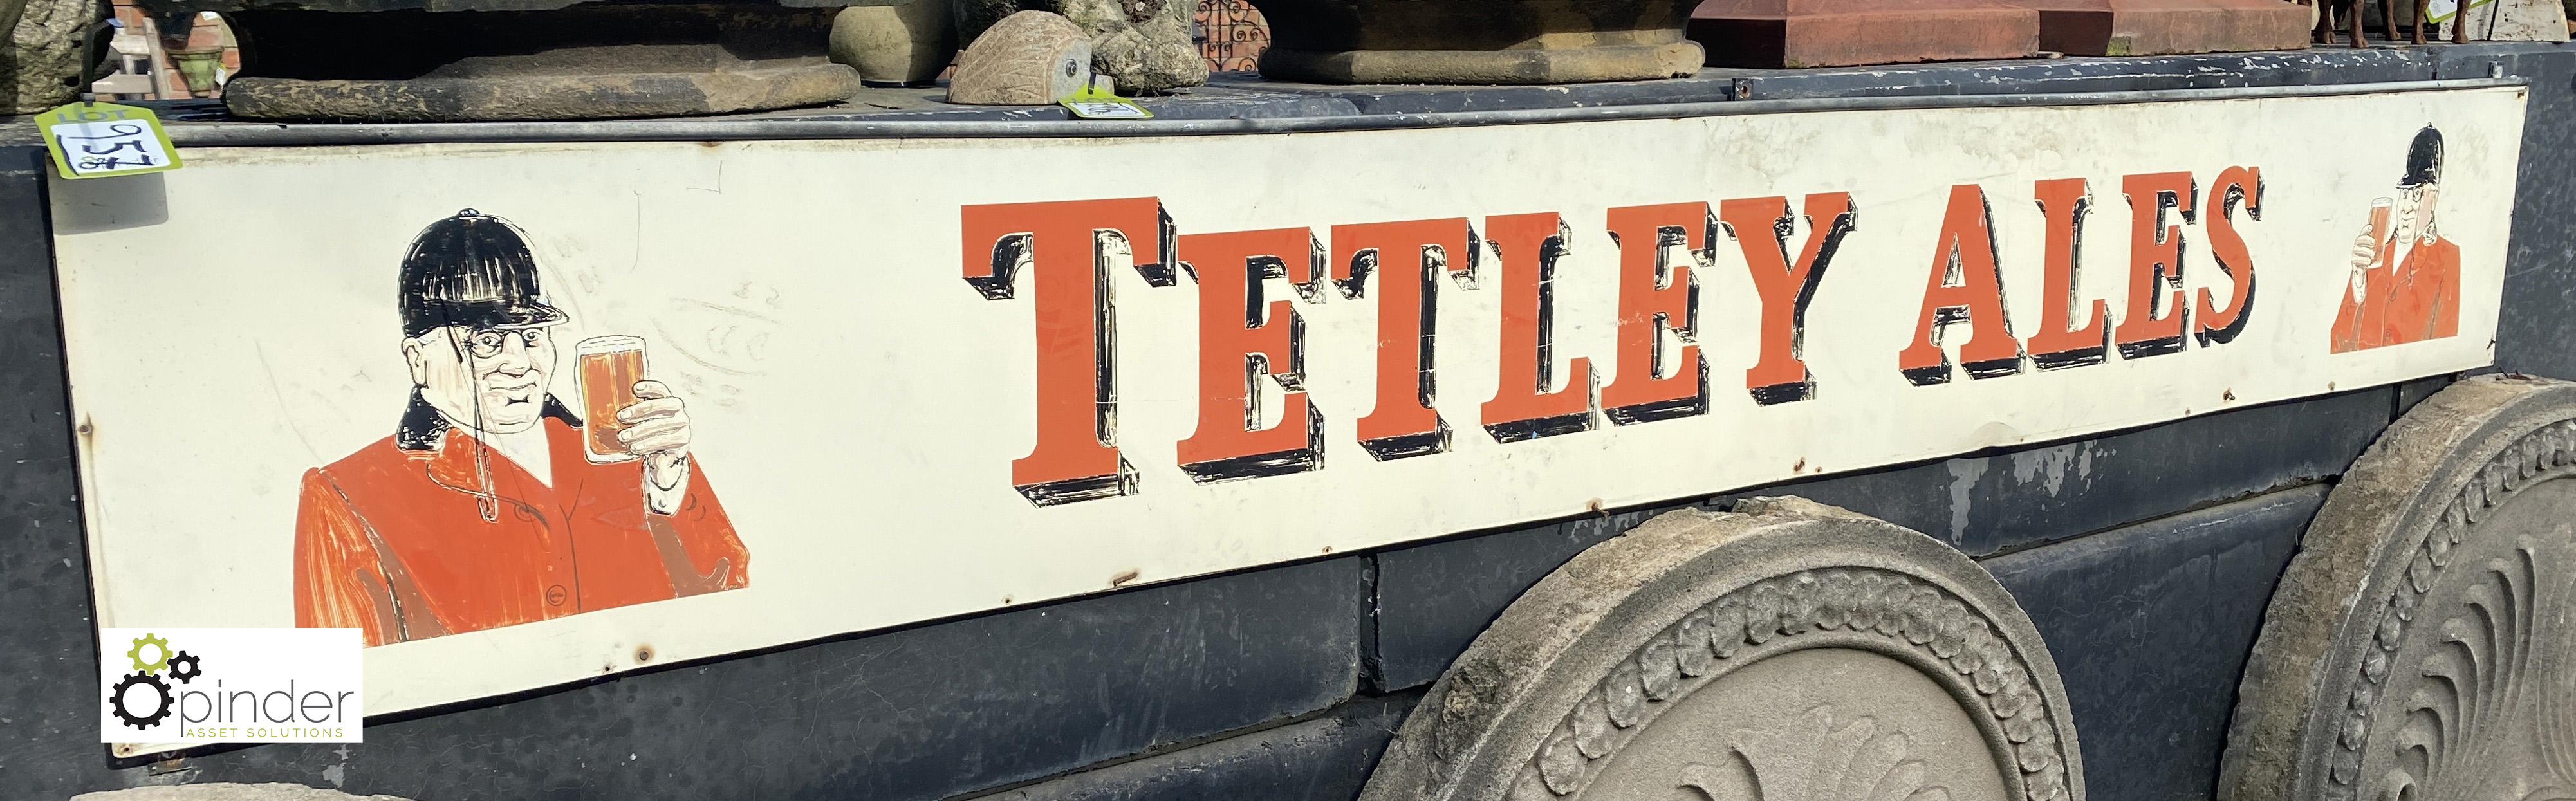 A vintage Tetley Ale Sign, with portrait of Joshua Tetley, 16in high x 120in long - Image 2 of 6